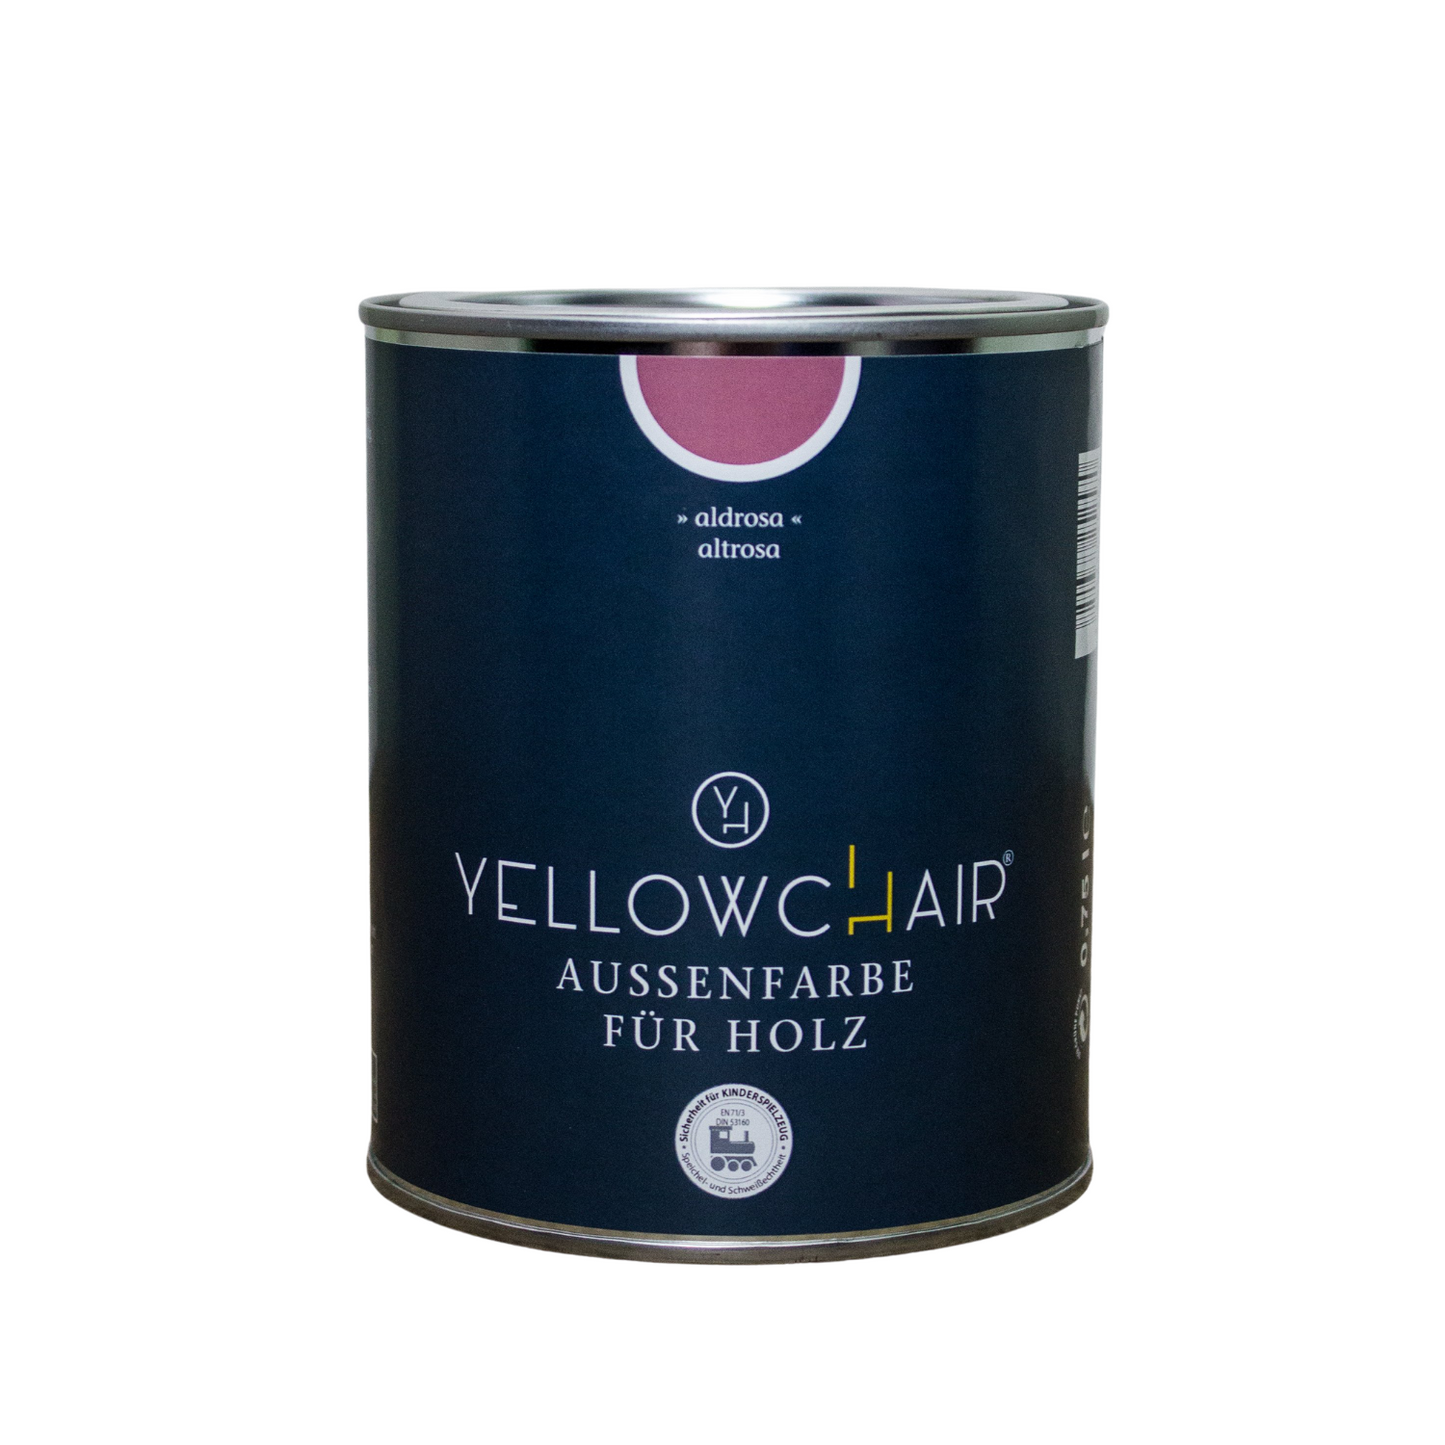 yellowchair exterior color for wood Aldrosa / old rose